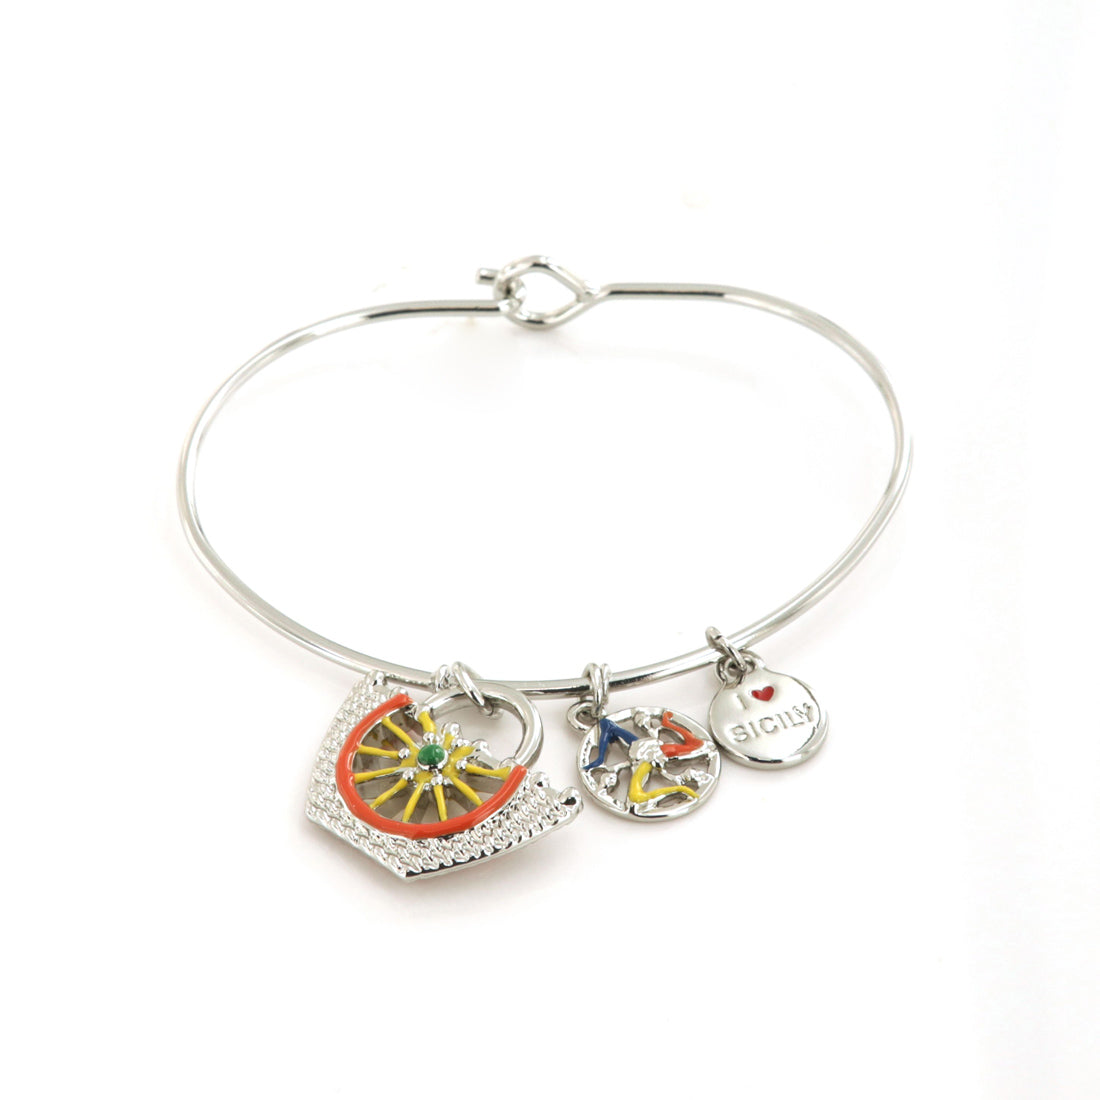 Rigid metal bracelet, with Sicilian coffa embellished with a cart wheel carletto in colored glazes